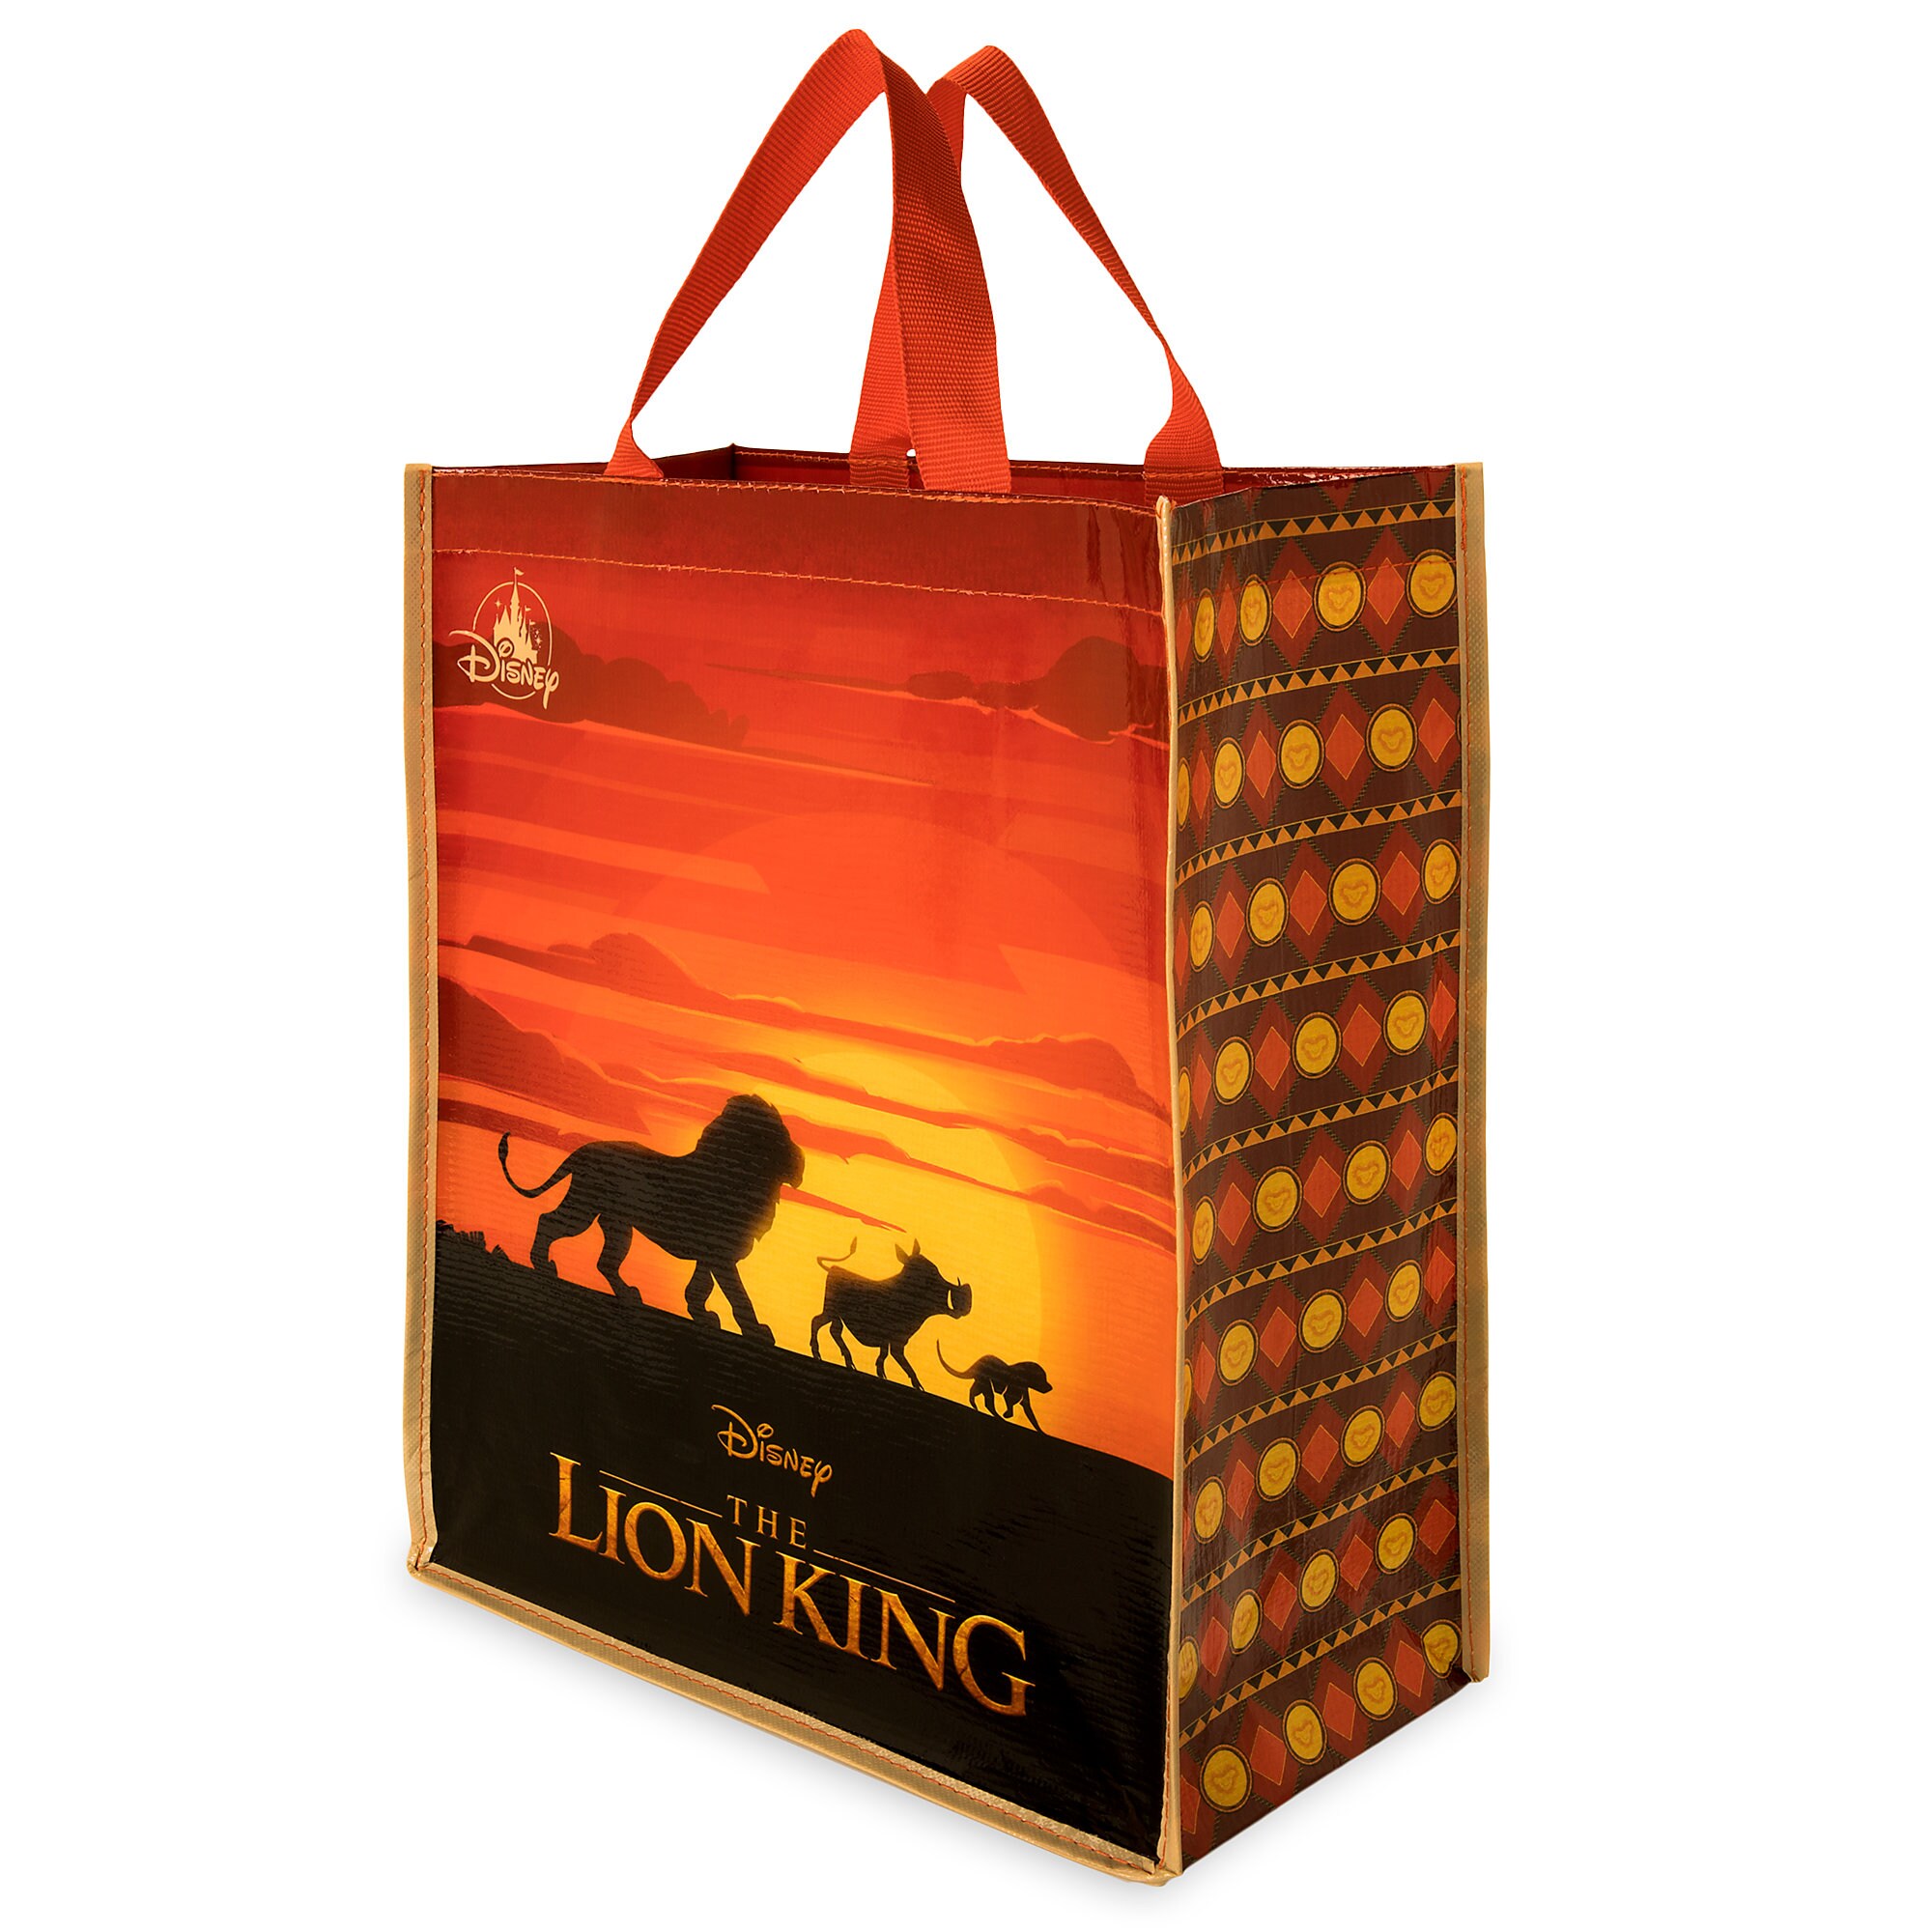 The Lion King Reusable Tote - The Lion King 2019 Film